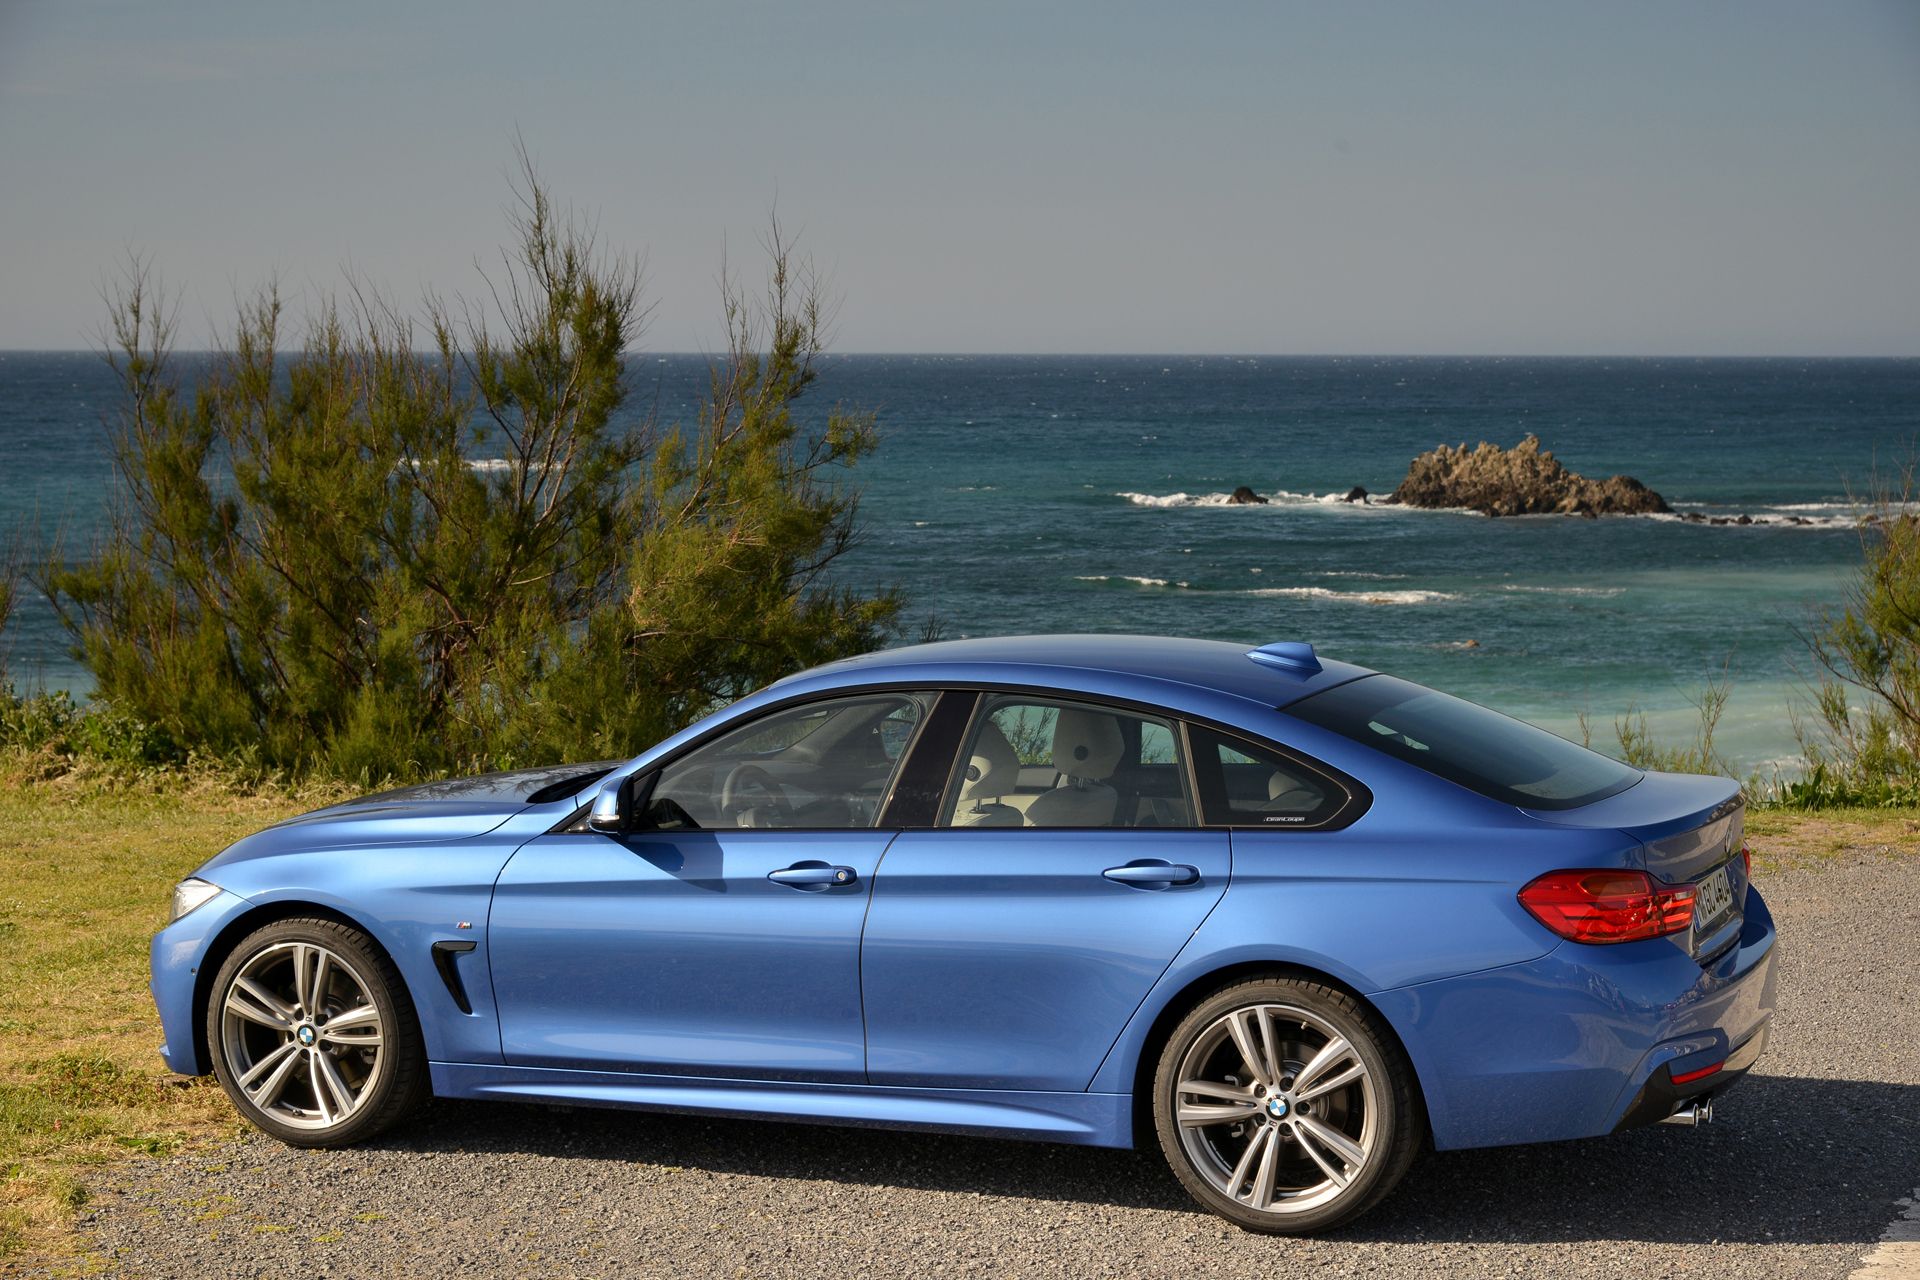 Bmw 4 Series Coupe Wallpapers